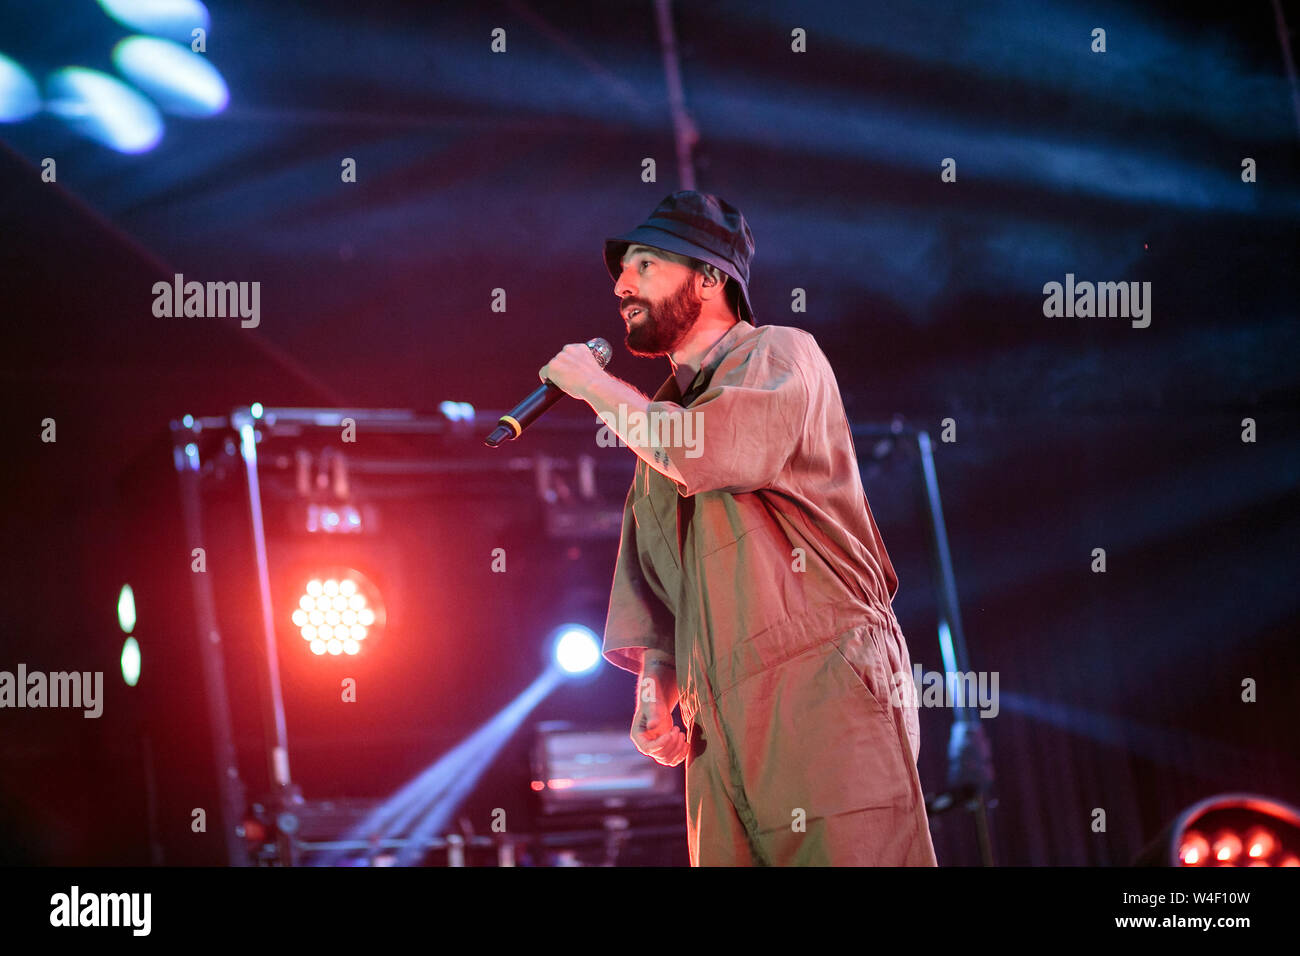 Coma Cose live 2019 July 19 Turin tthe italian rap duo, coma cose, perform live during gruvillage festival Stock Photo